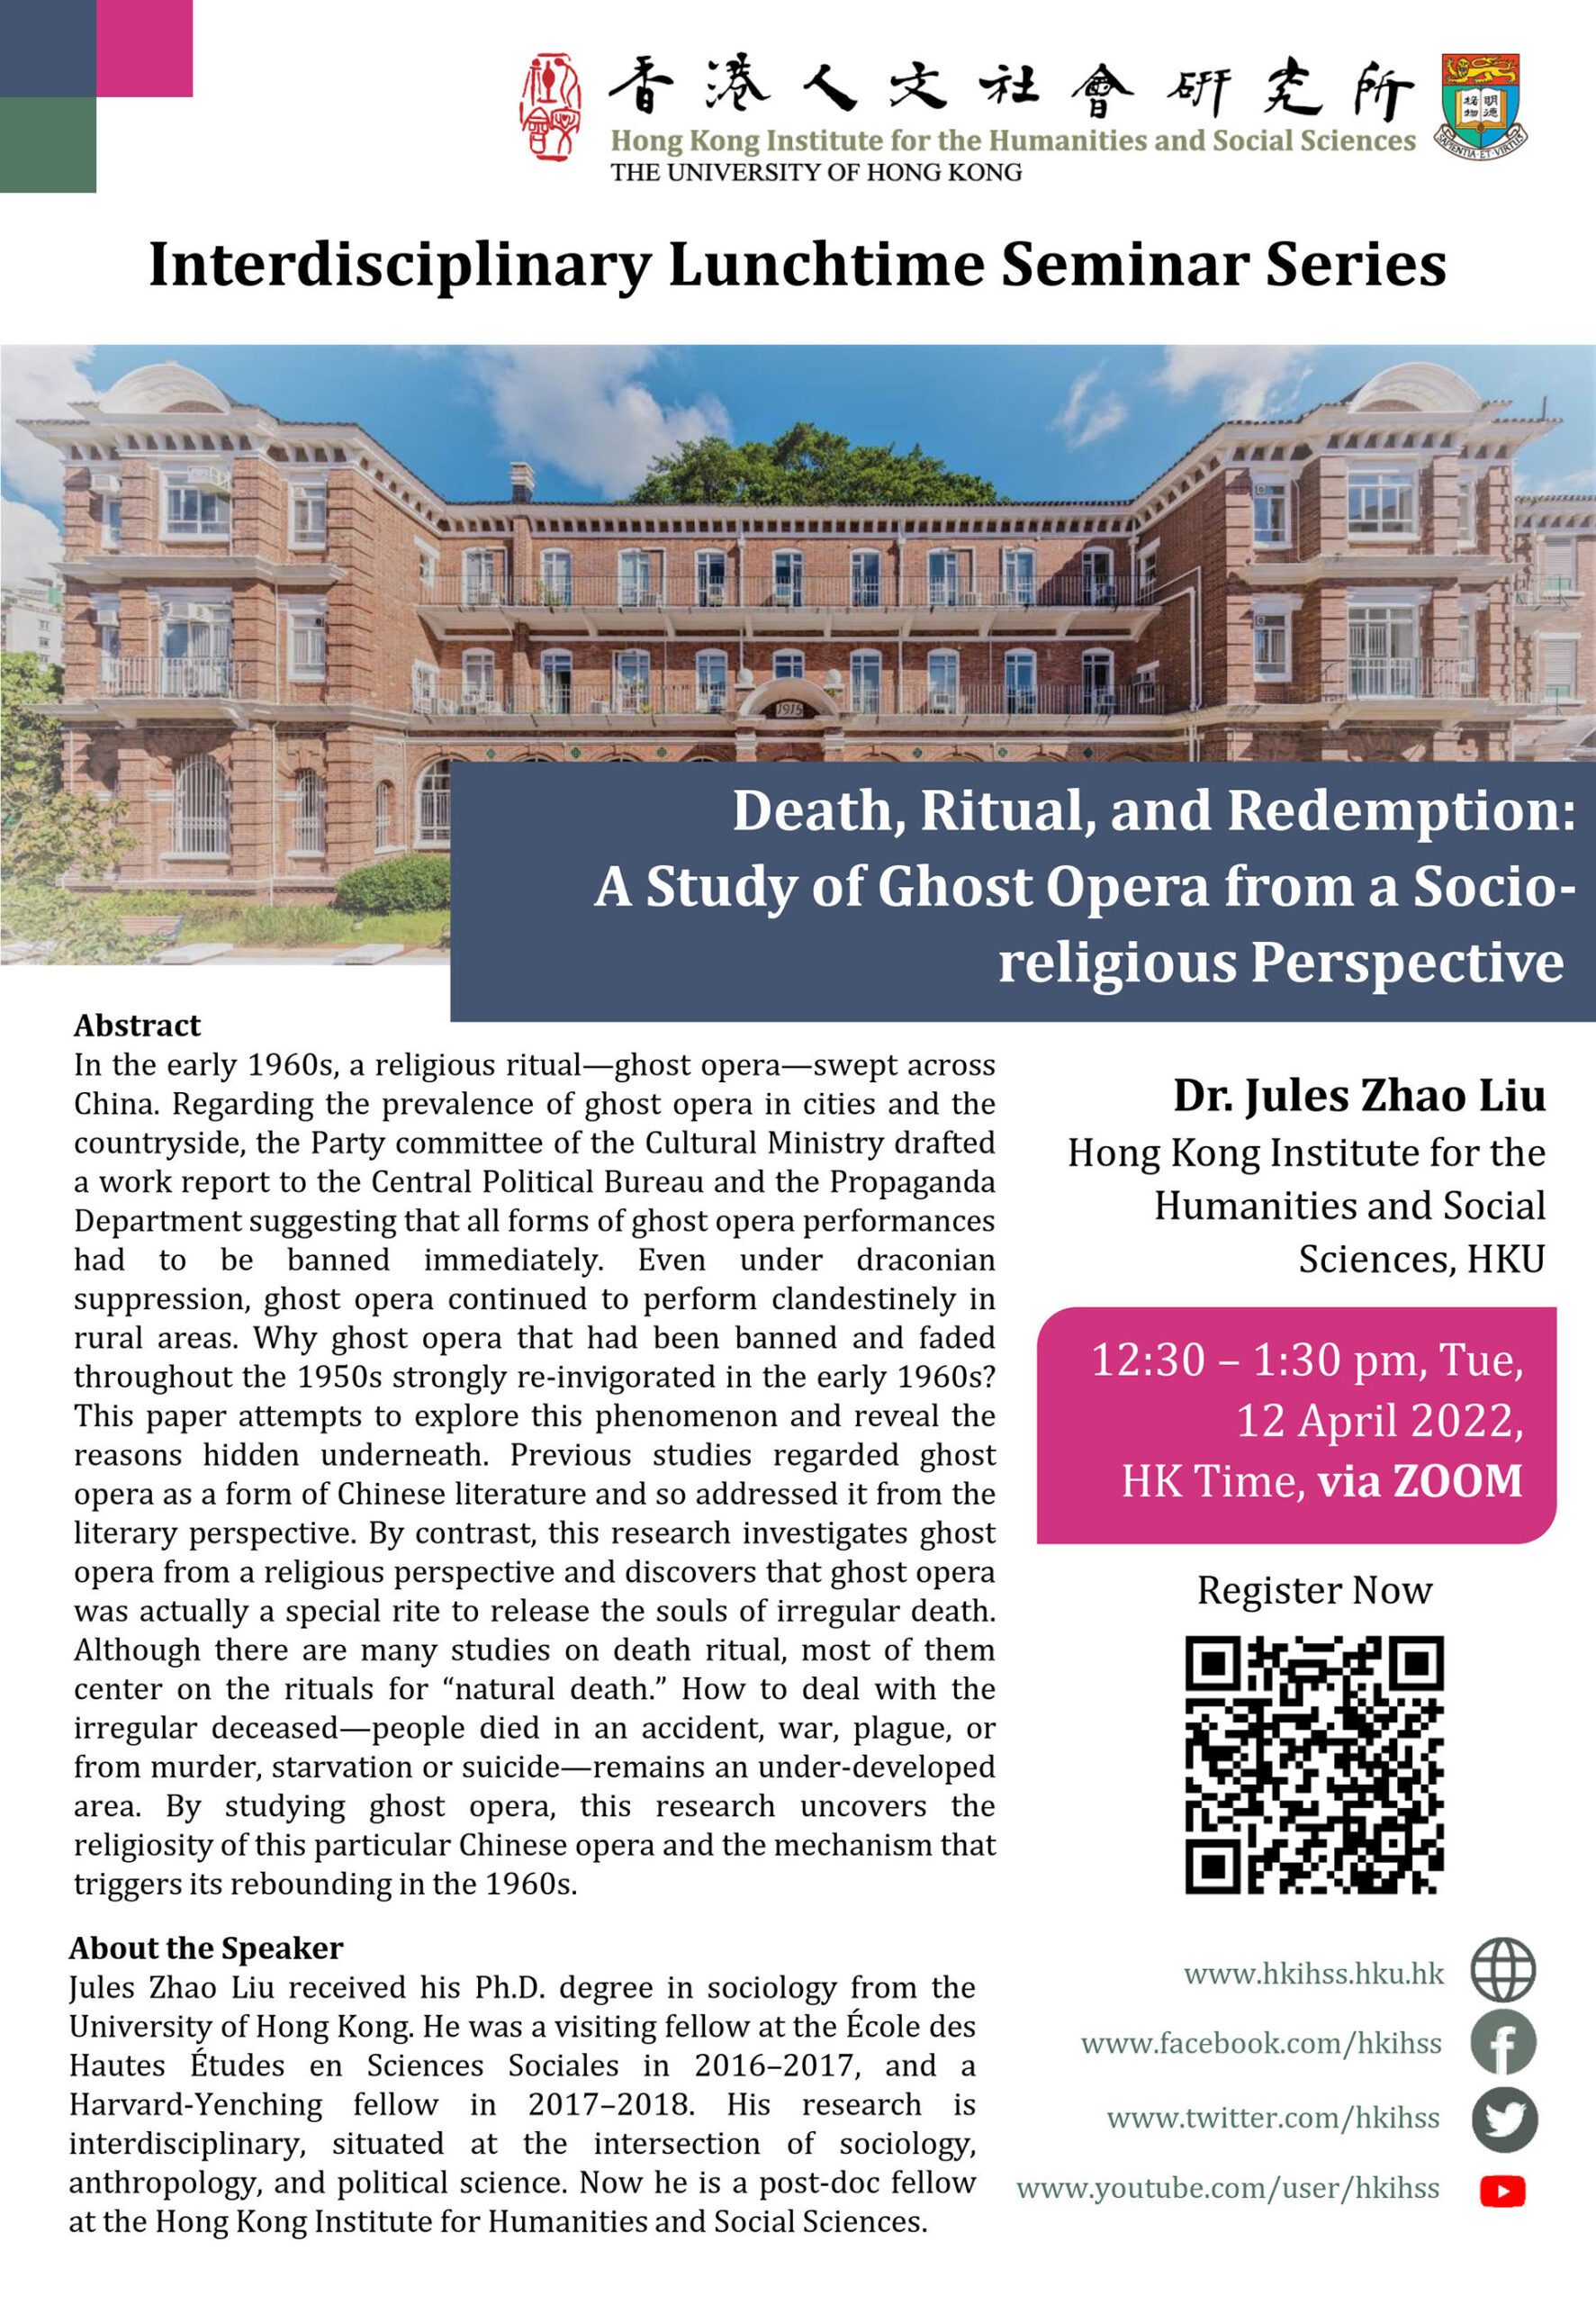 Interdisciplinary Lunchtime Seminar on “Death, Ritual, and Redemption: A Study of Ghost Opera from a Socio-religious Perspective” by Dr. Jules Zhao Liu (April 12, 2022)